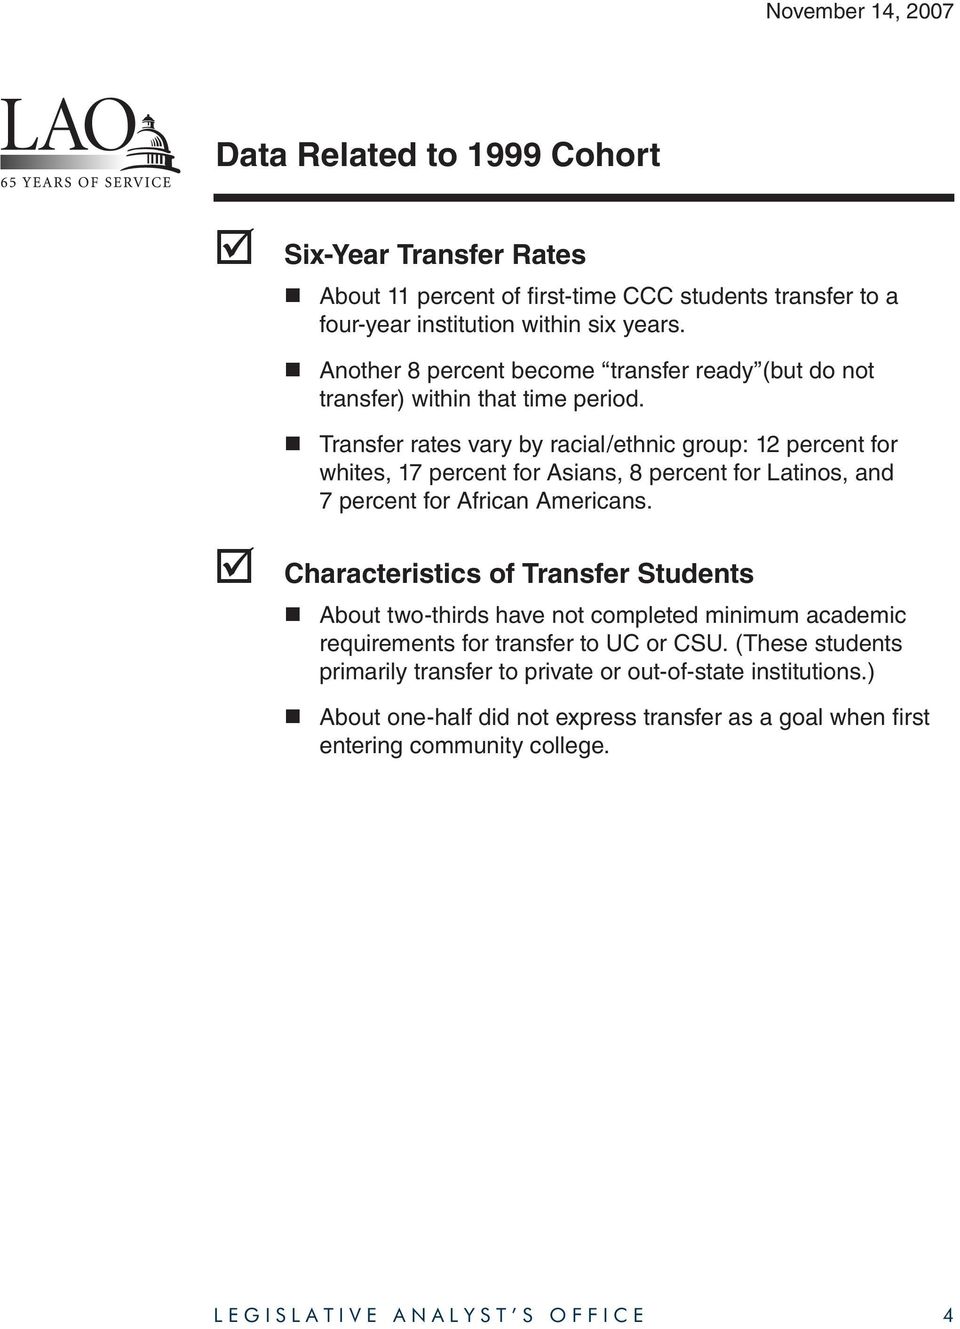 Transfer rates vary by racial/ethnic group: 12 percent for whites, 17 percent for Asians, 8 percent for Latinos, and 7 percent for African Americans.